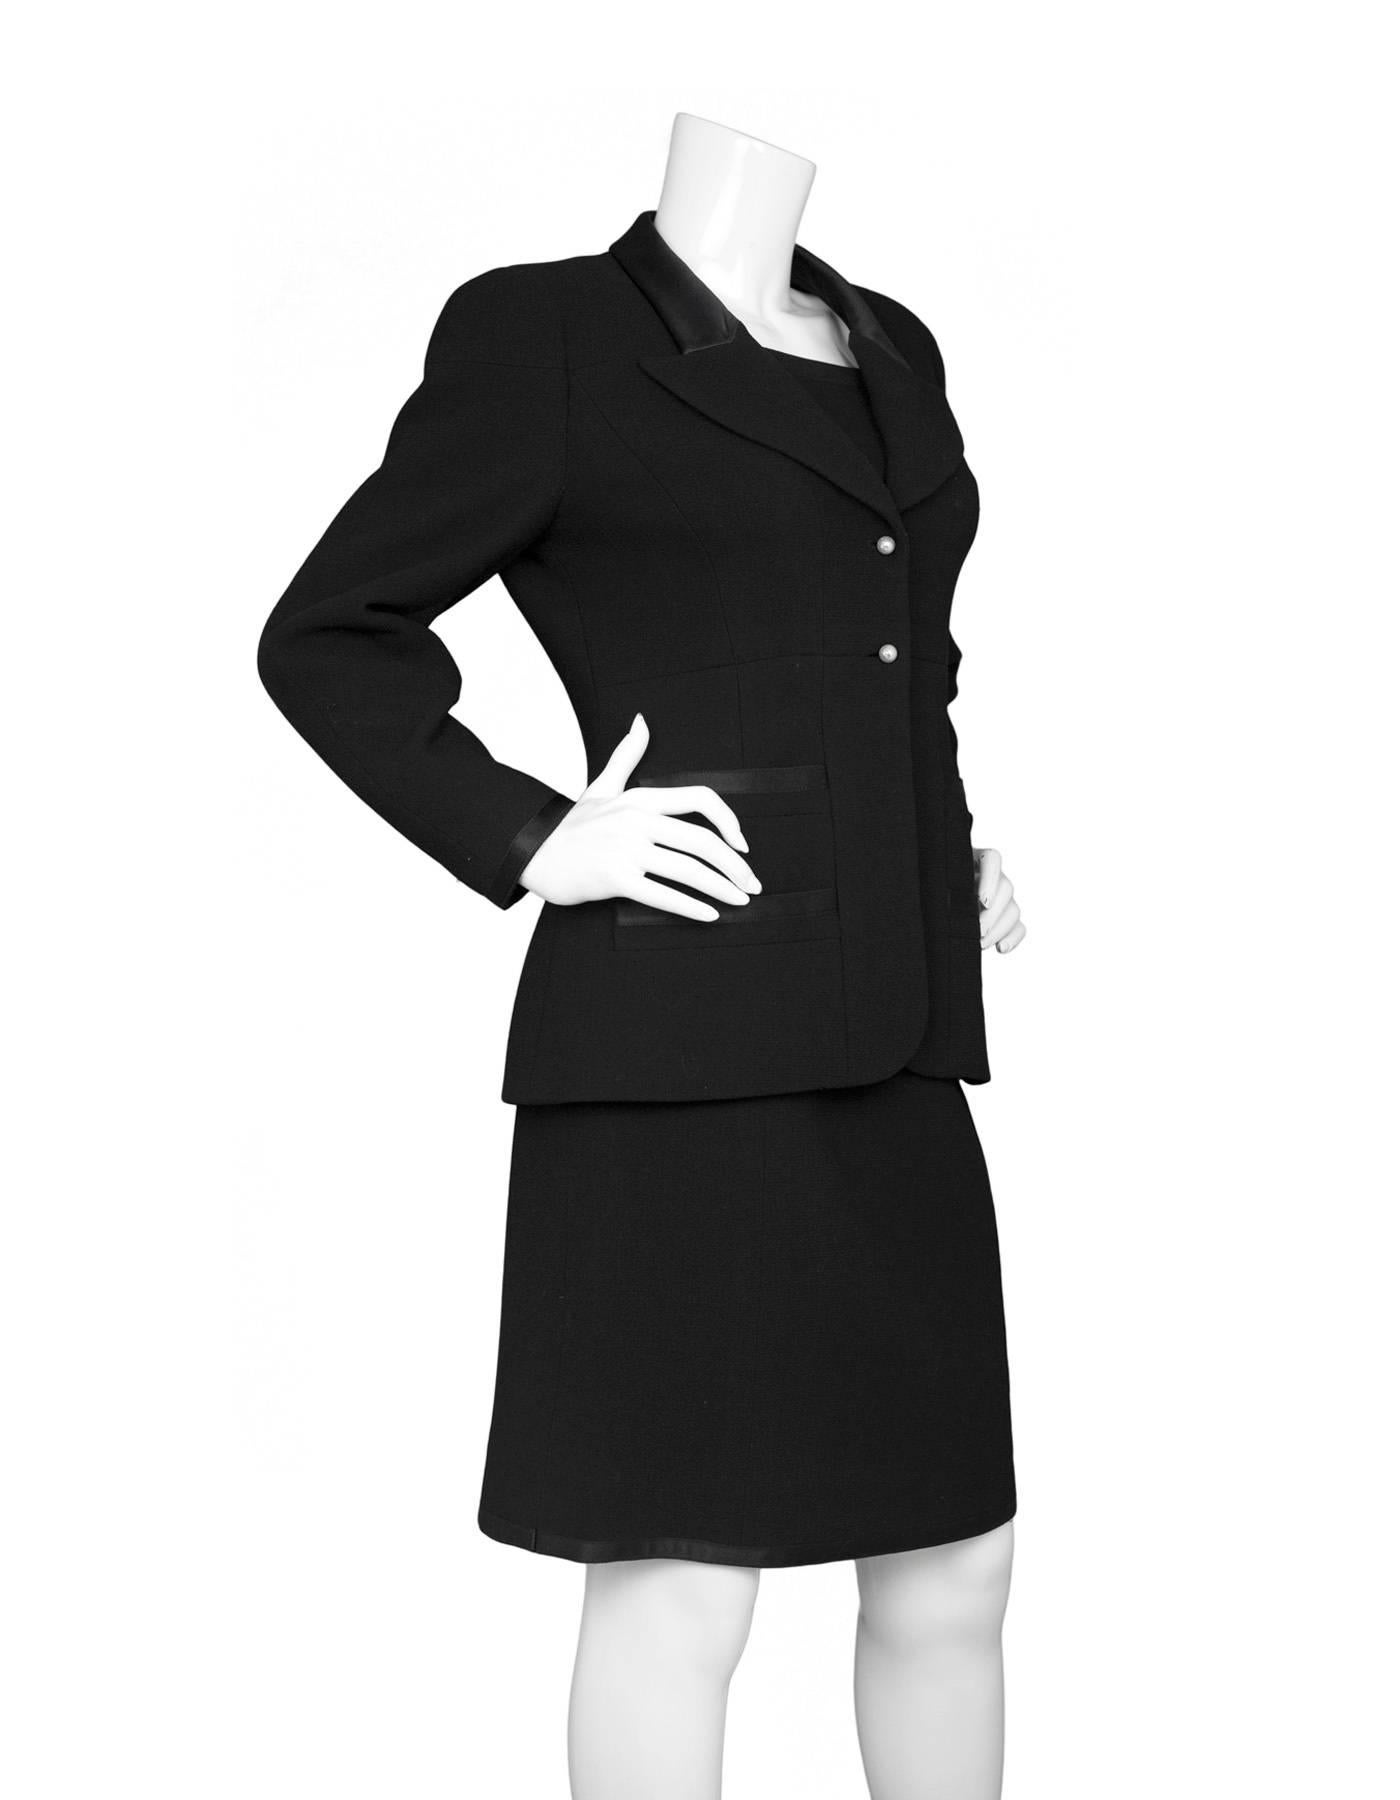 Chanel Black Wool 2 Piece Skirt Suit 
Features satin trim throughout and pearl buttons with CC's on jacket

Made In: France
Year of Production: 1997
Color: Black
Composition: 100% wool
Lining: Black, 95% silk, 5% spandex
Closure/Opening: Jacket-